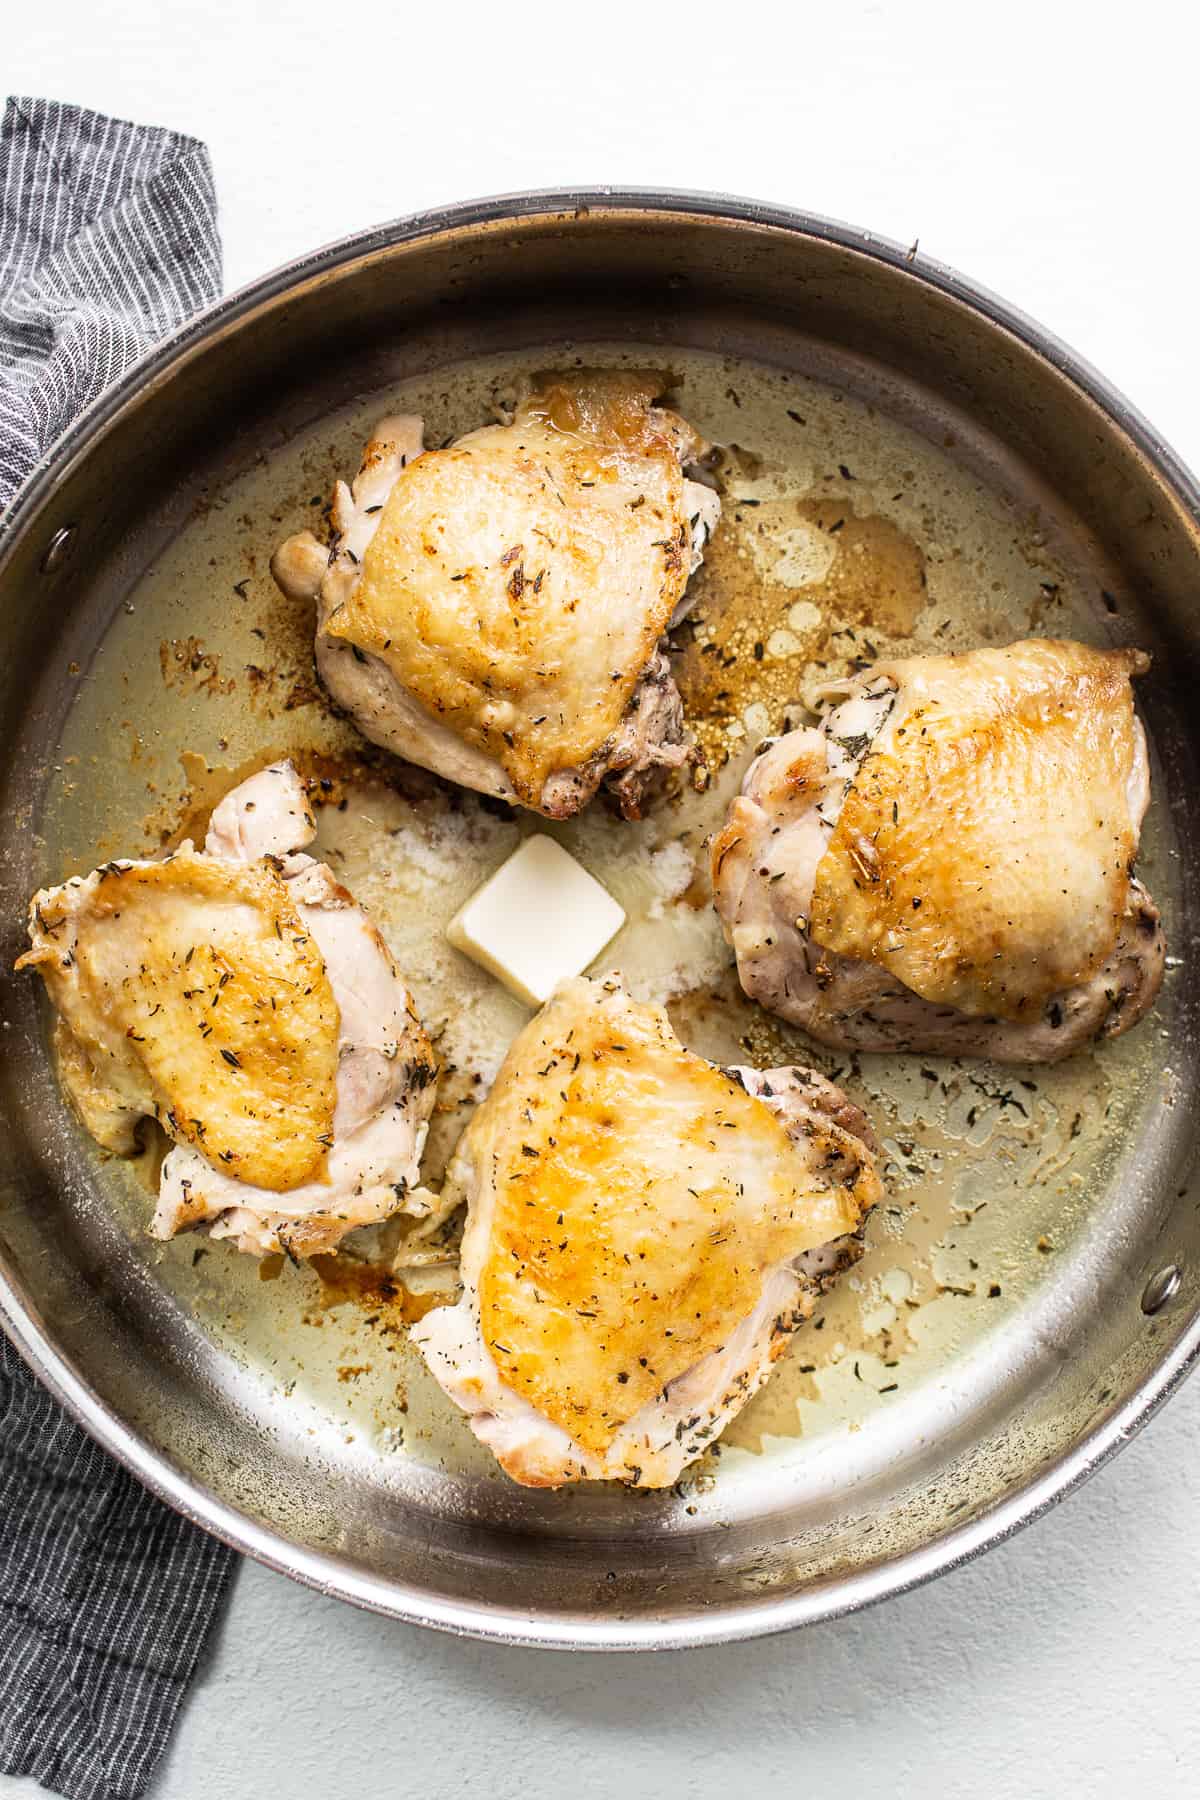 Chicken thighs searing in a skillet.